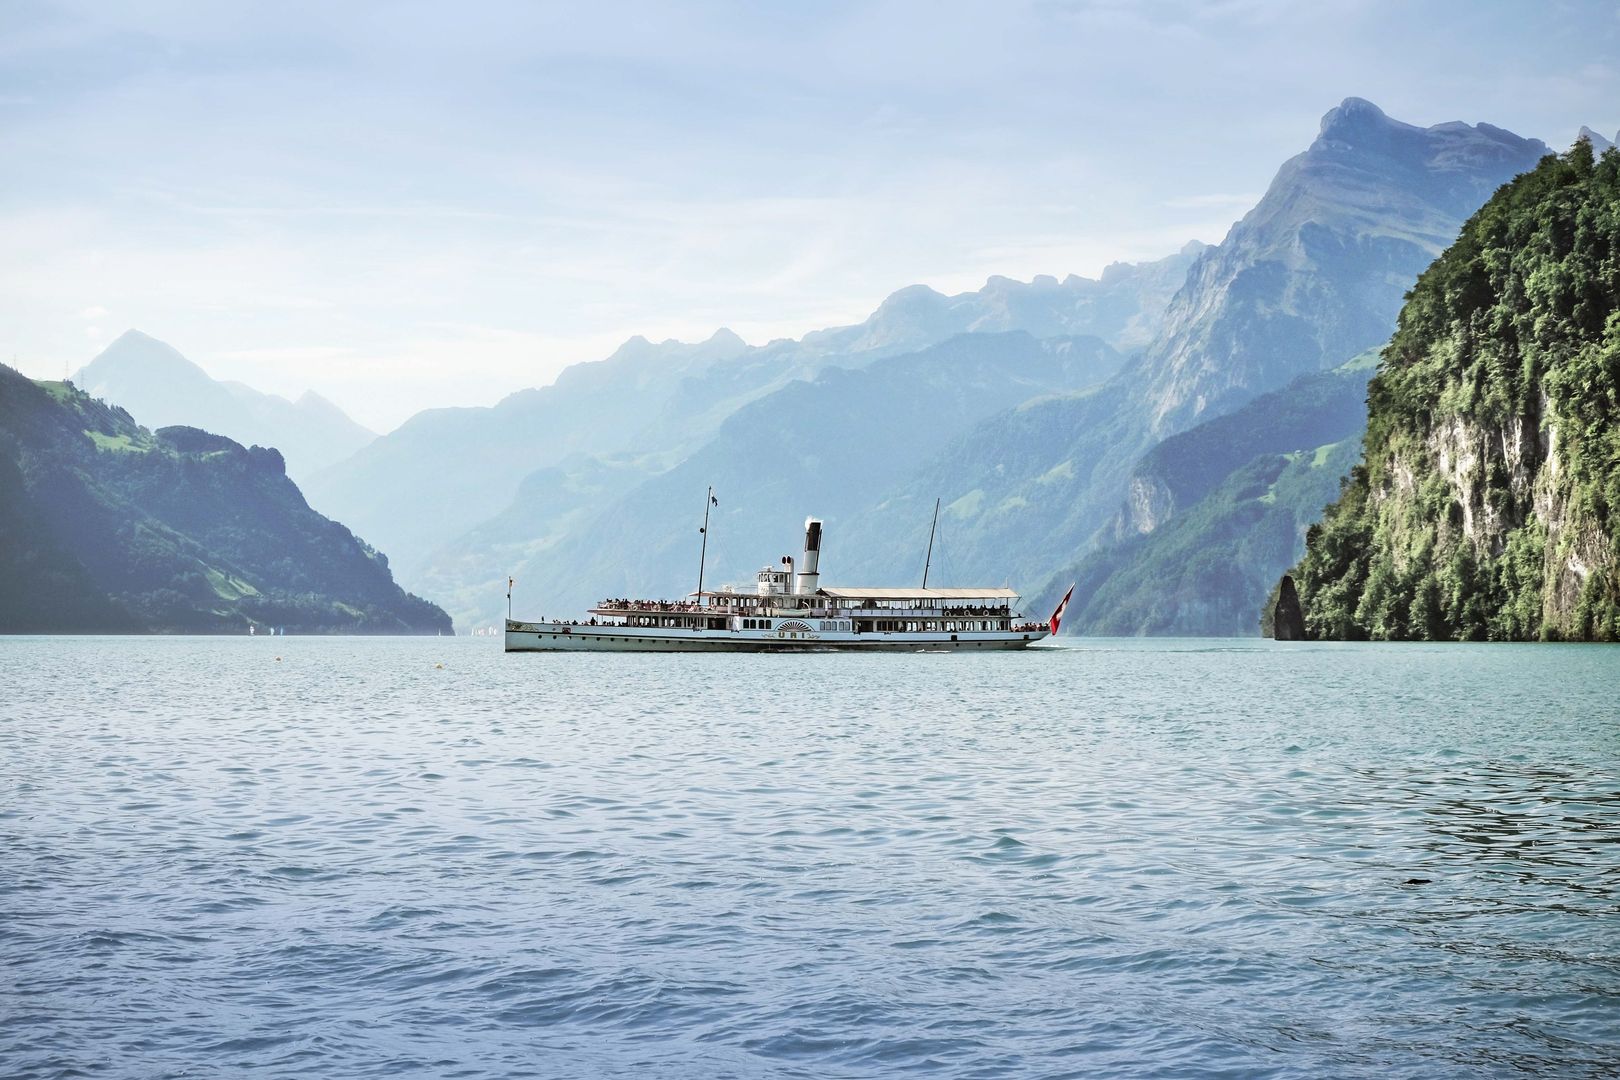 The steamboat on Lake Lucerne makes the big lake tour.